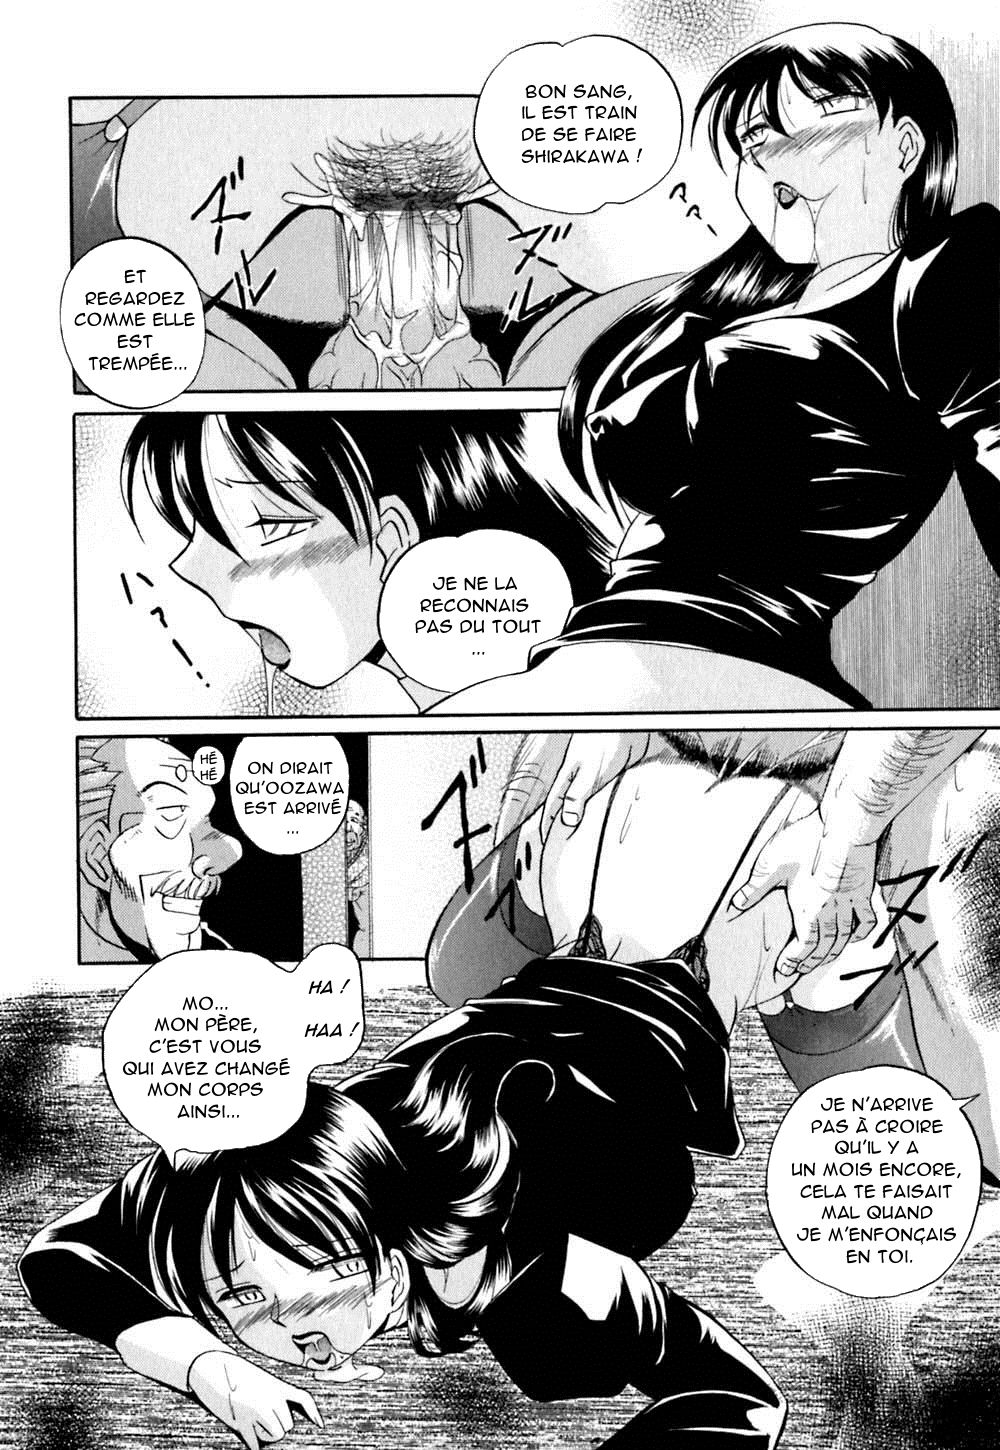 Wedge of Lust 07 [O-S](french) 